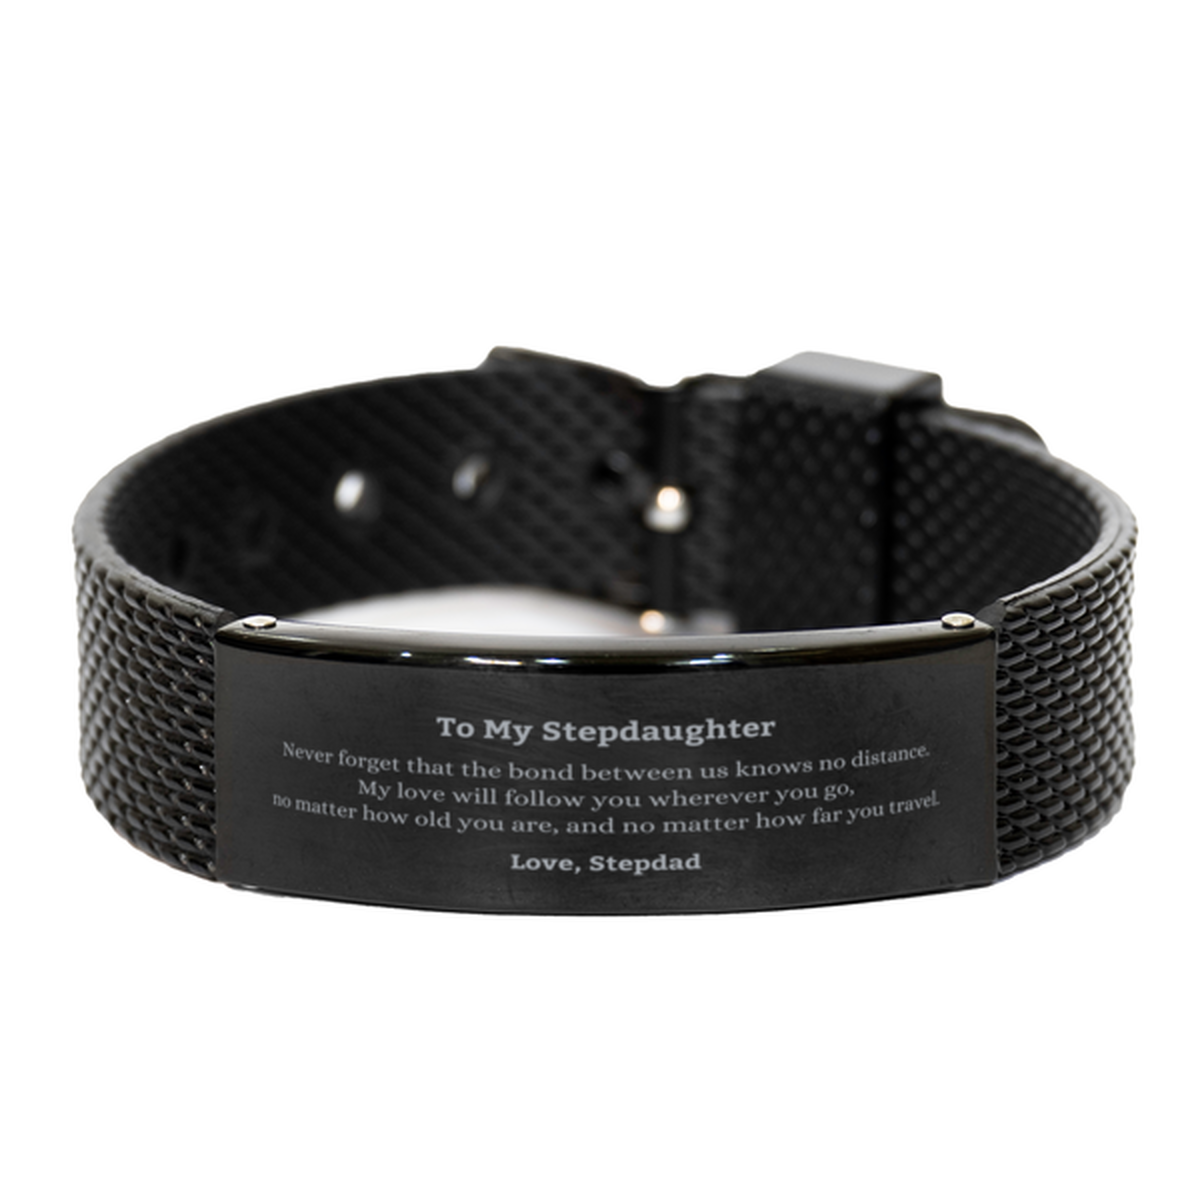 Stepdaughter Birthday Gifts from Stepdad, Adjustable Black Shark Mesh Bracelet for Stepdaughter Christmas Graduation Unique Gifts Stepdaughter Never forget that the bond between us knows no distance. Love, Stepdad